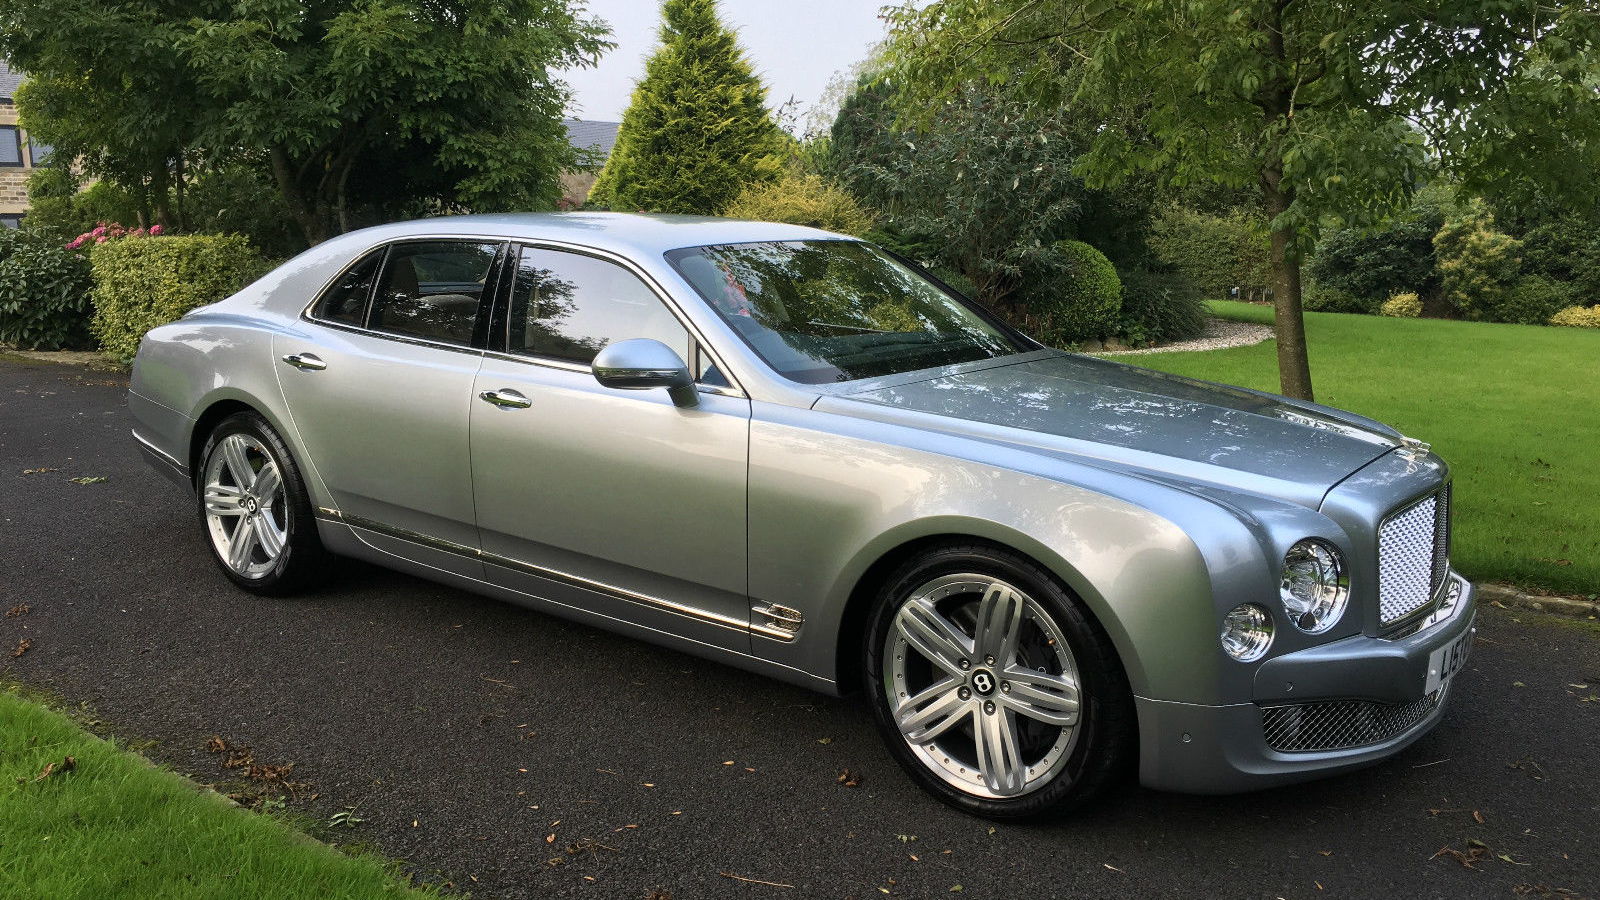 Lister CEO is selling his Bentley Mulsanne